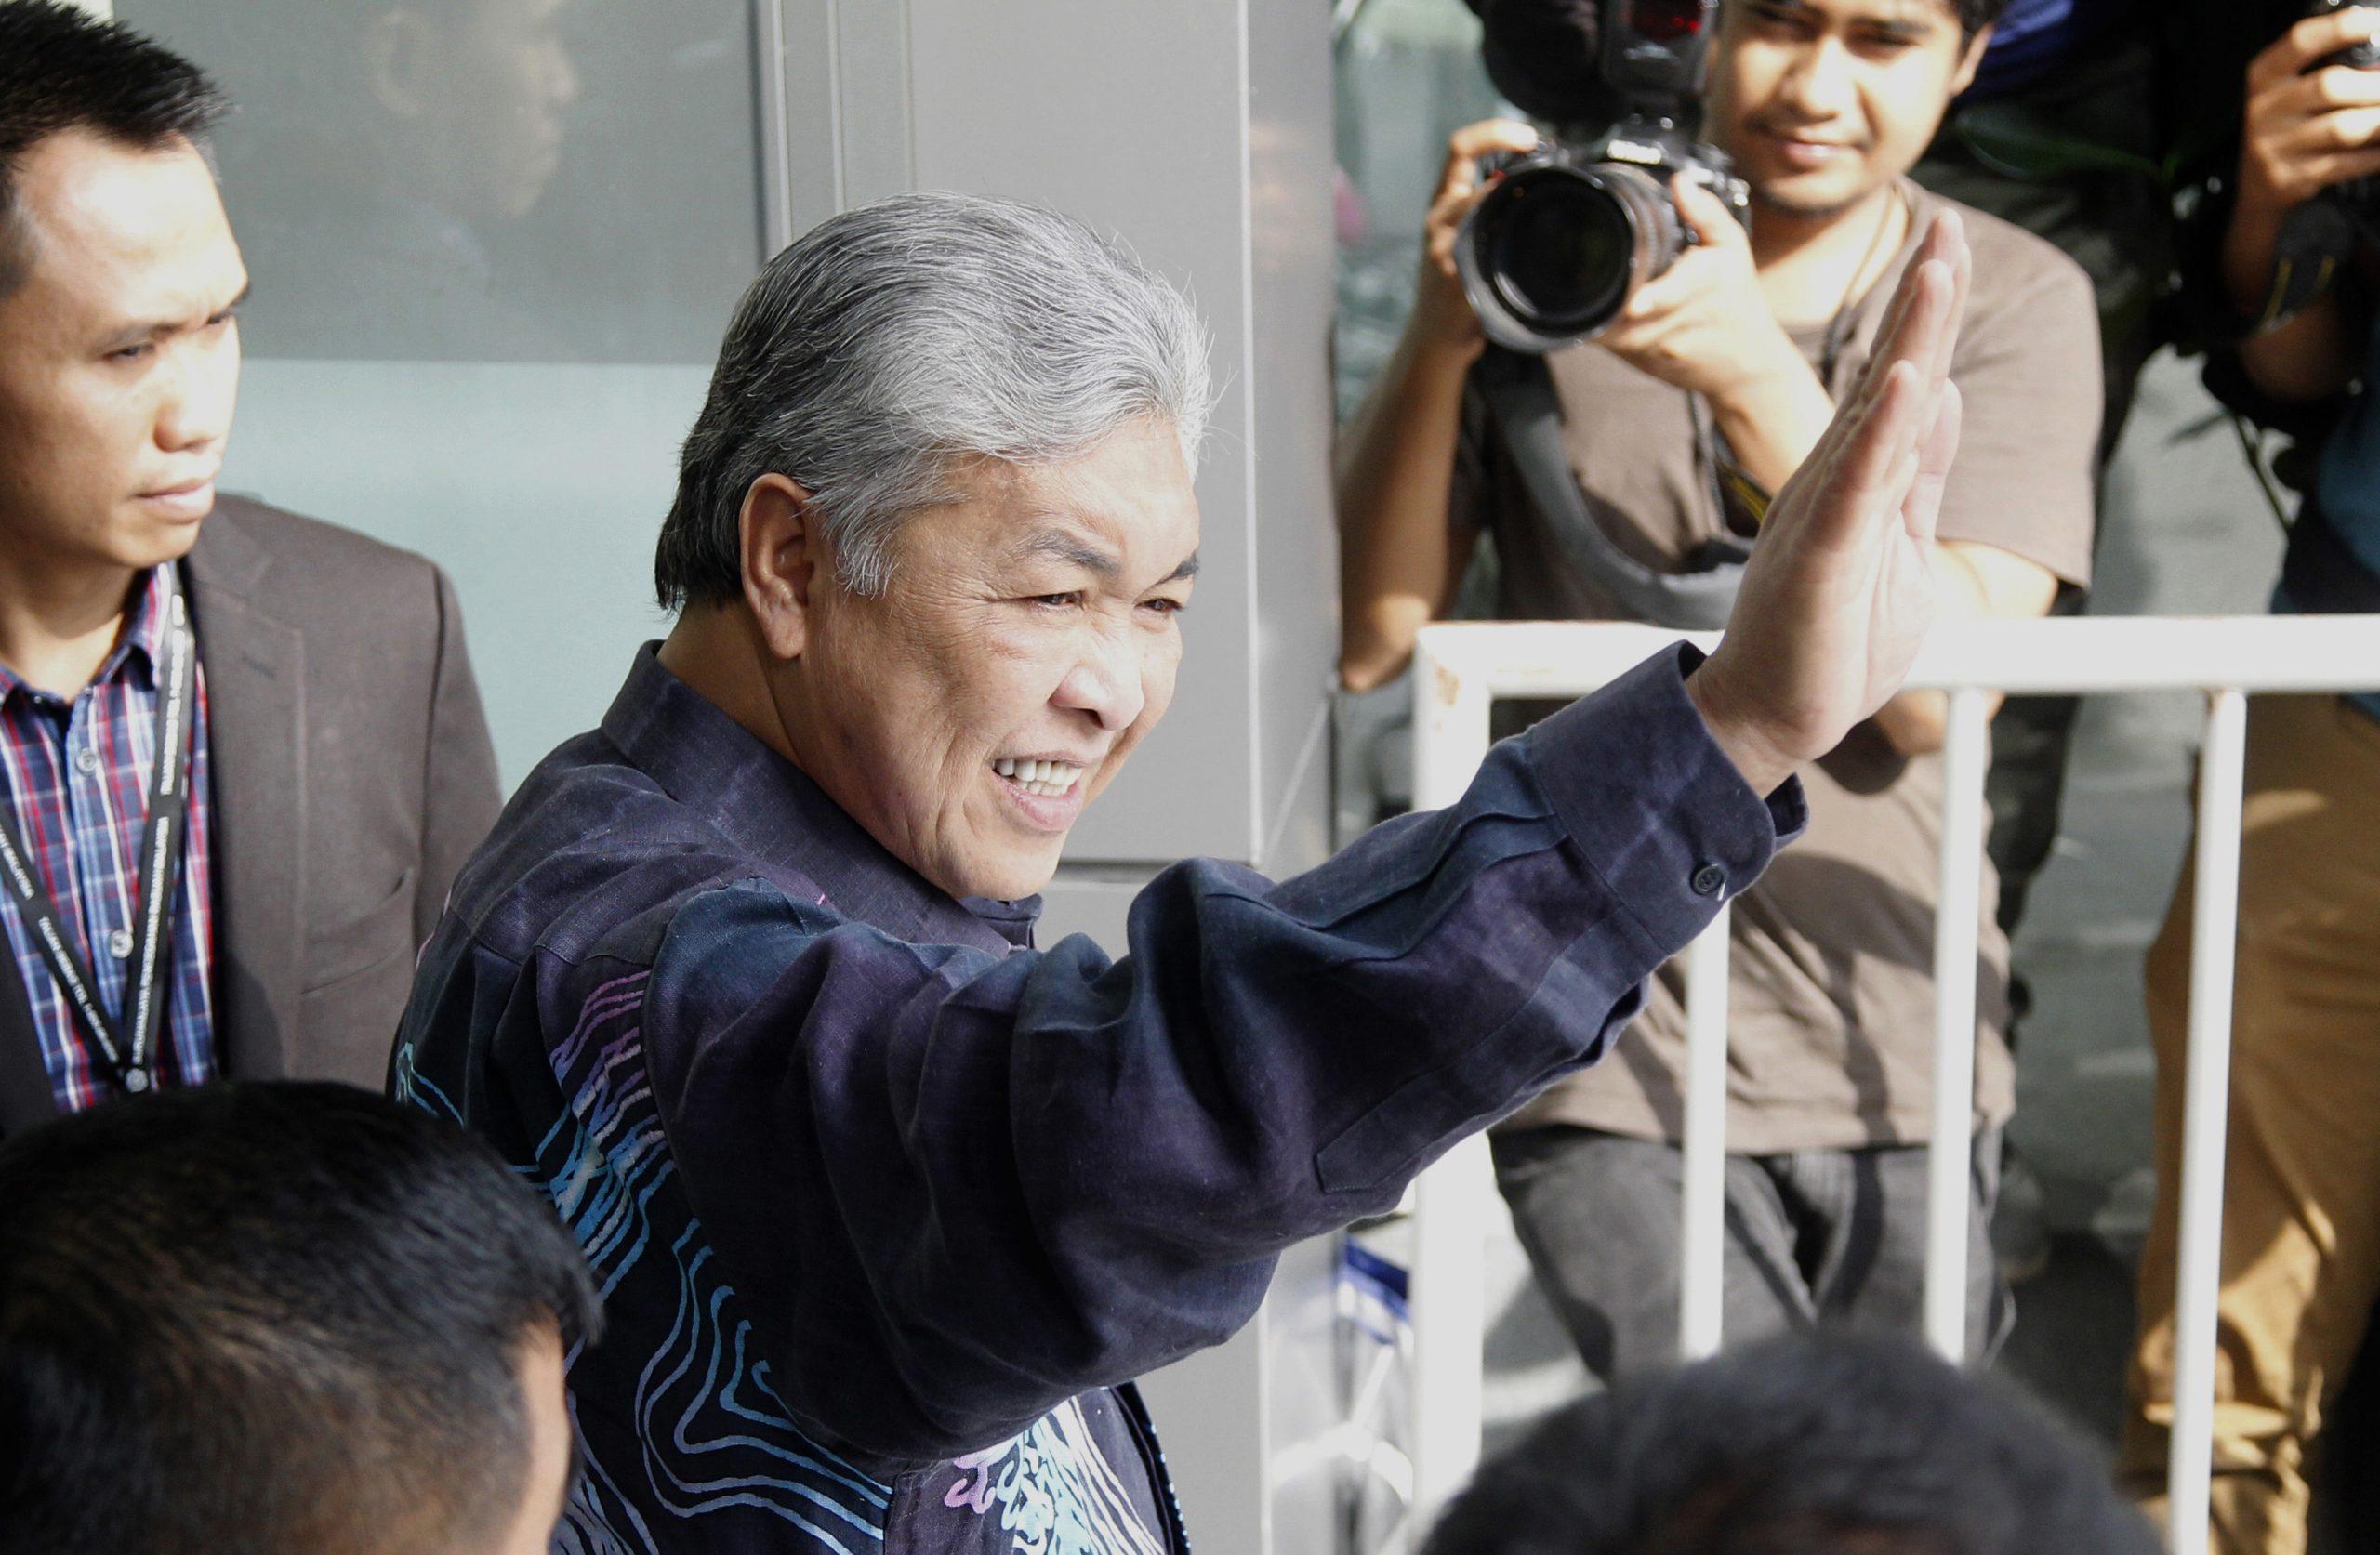 Umno president Ahmad Zahid Hamidi has claimed trial to 47 corruption charges in relation to millions of ringgit from Yayasan Akalbudi. Photo: AP